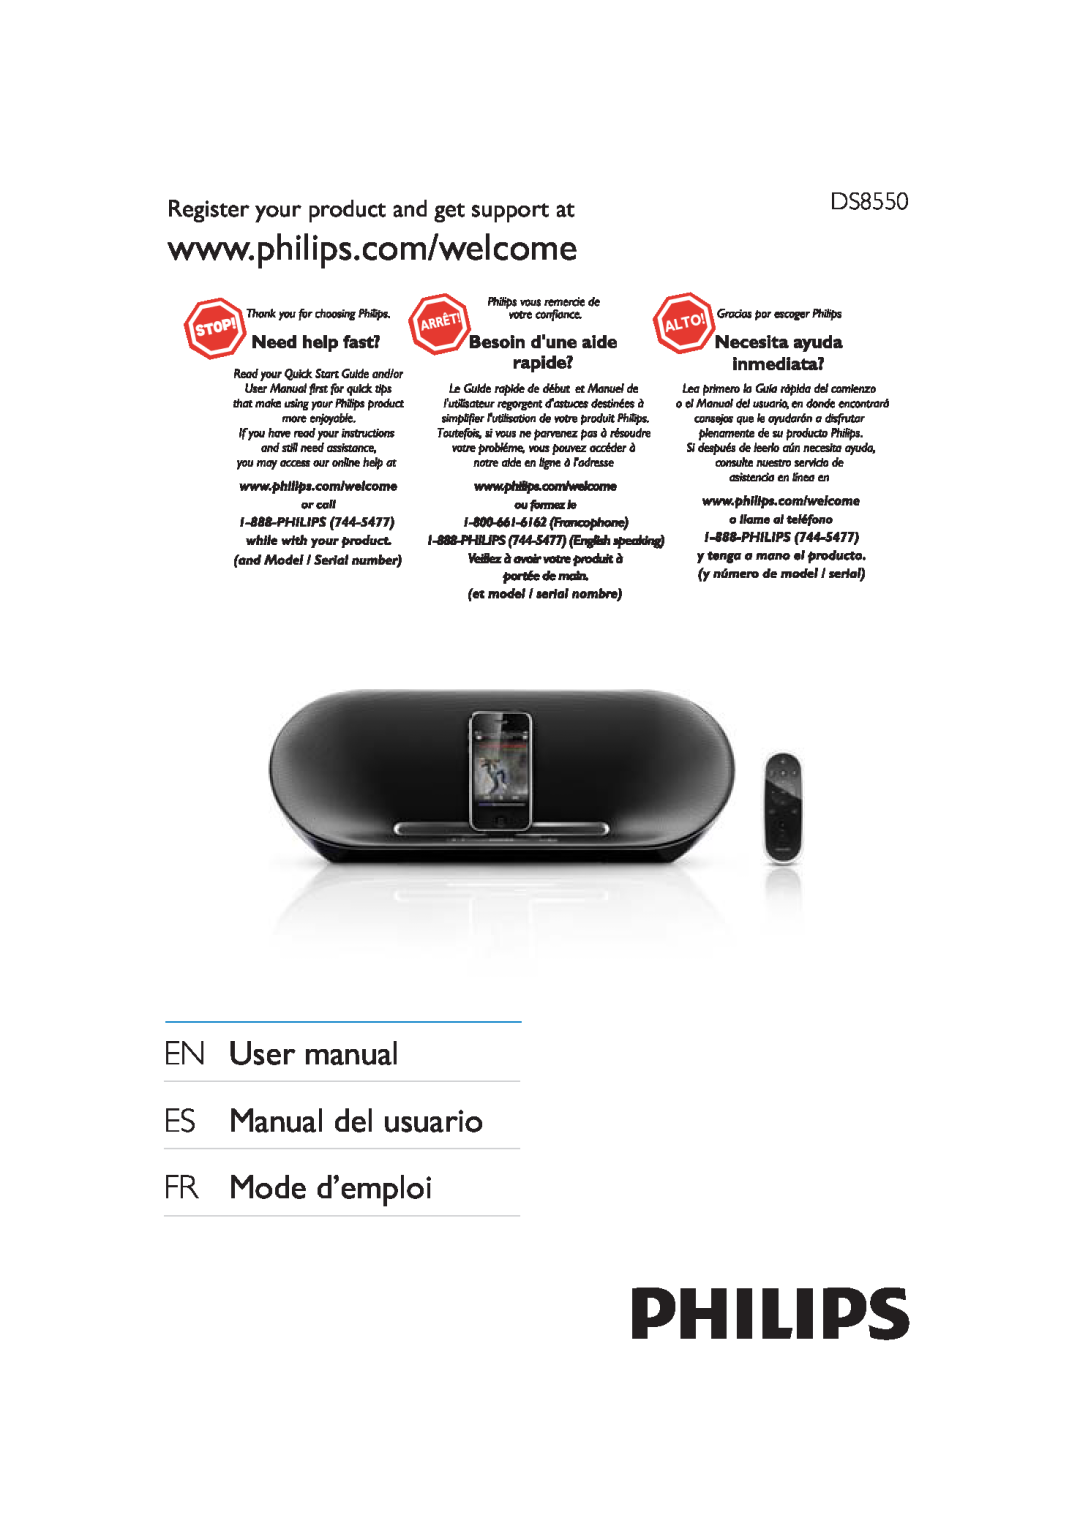 Philips DS8550 user manual Register your product and get support at 